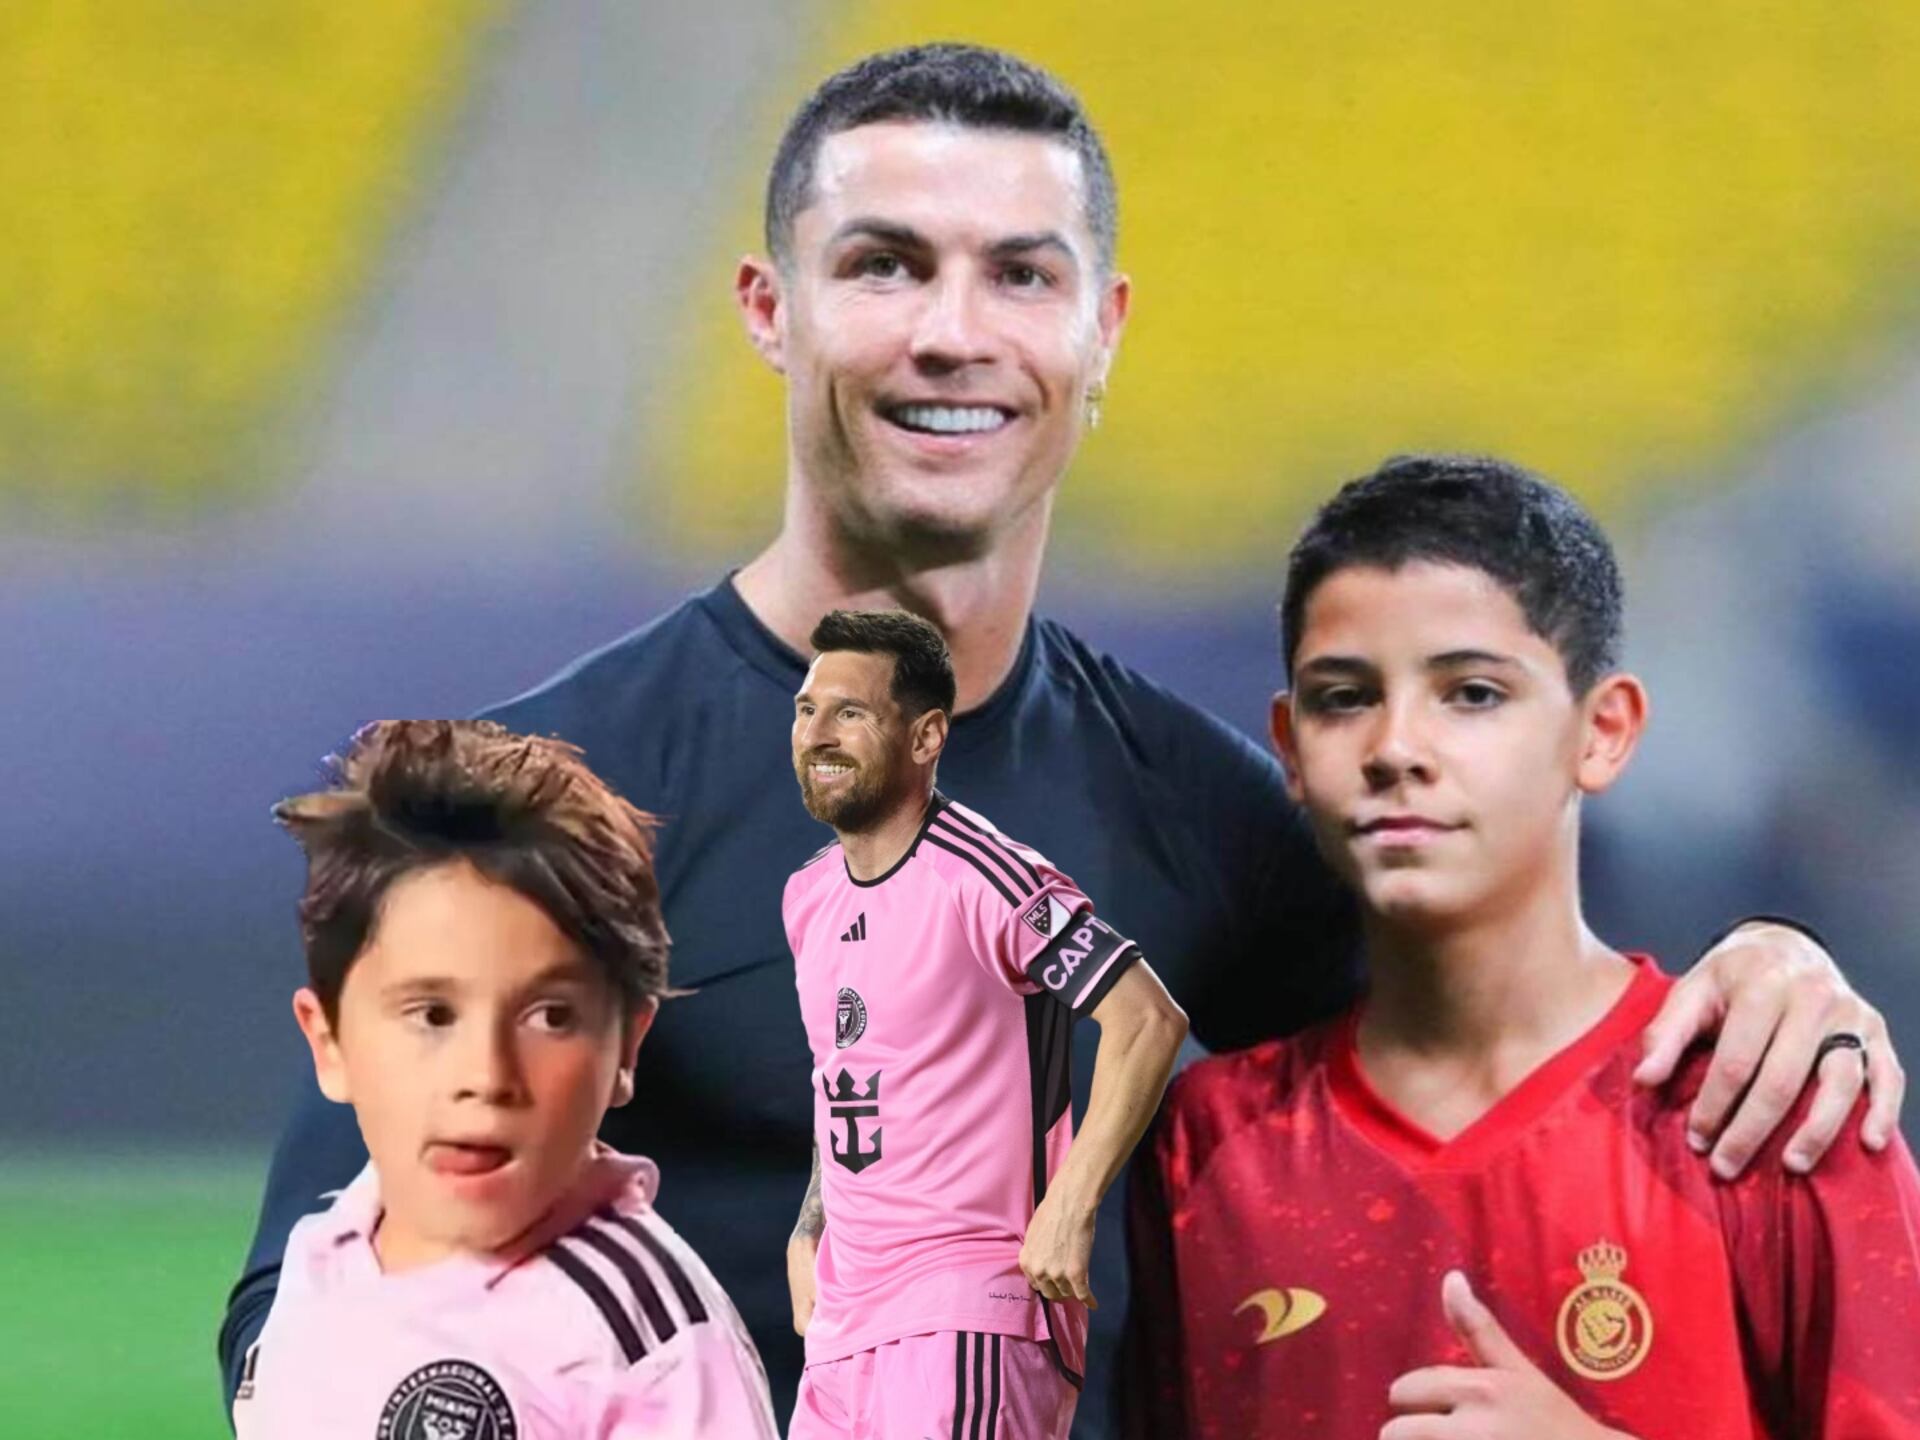 While Cristiano Jr goes with CR7 to the events in Saudi, what Messi’s son does after his father’s game